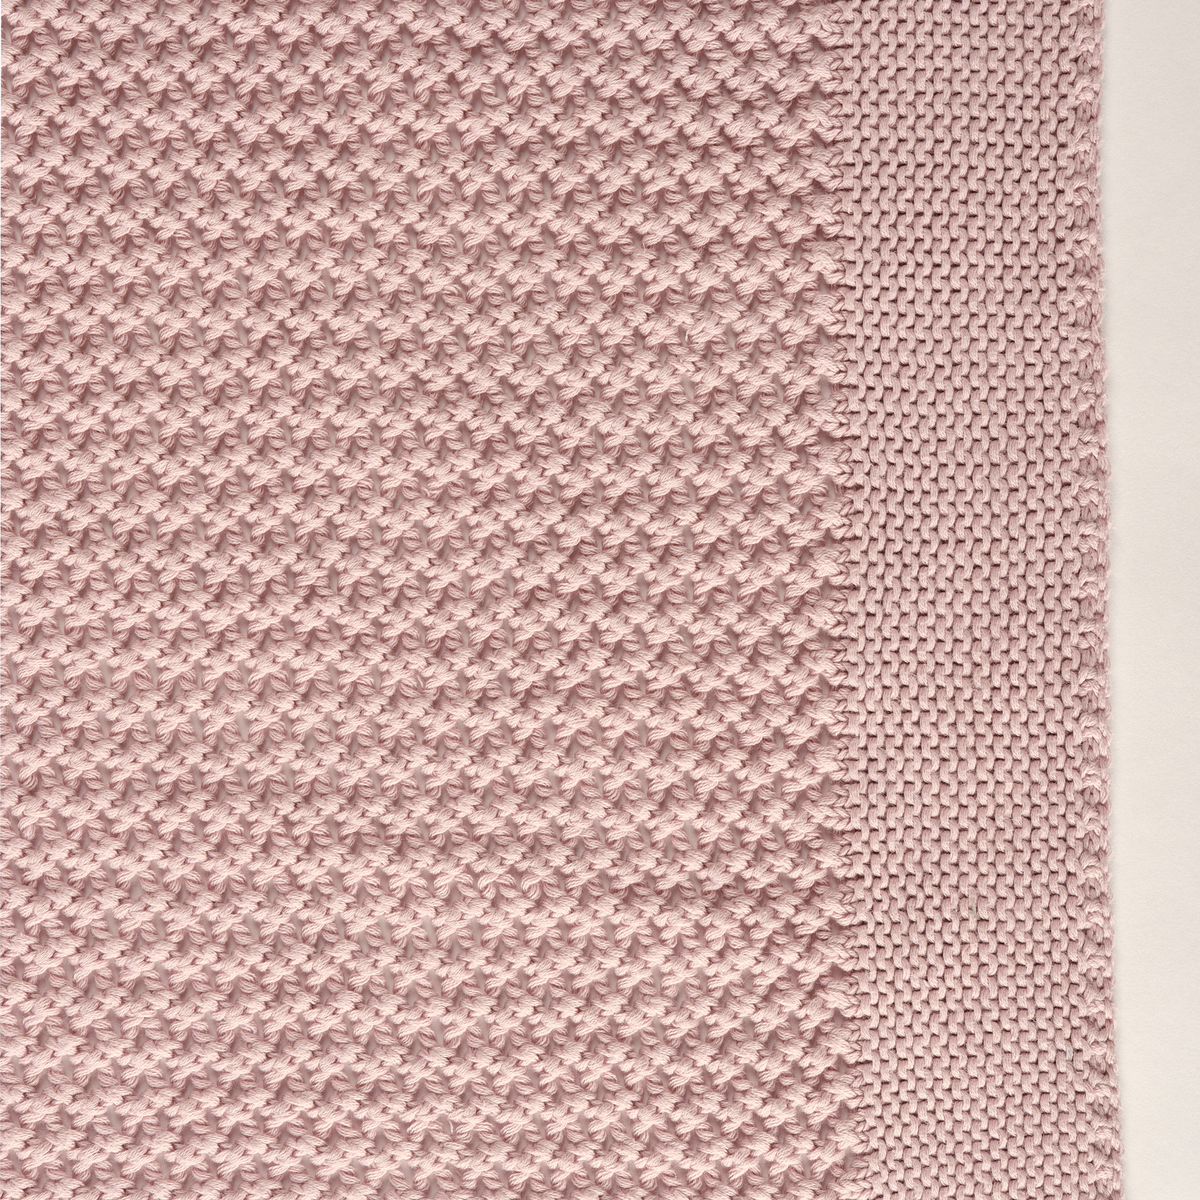 Swatch Sample of Celso de Lemos Balade Throw in Nuage Rose Color